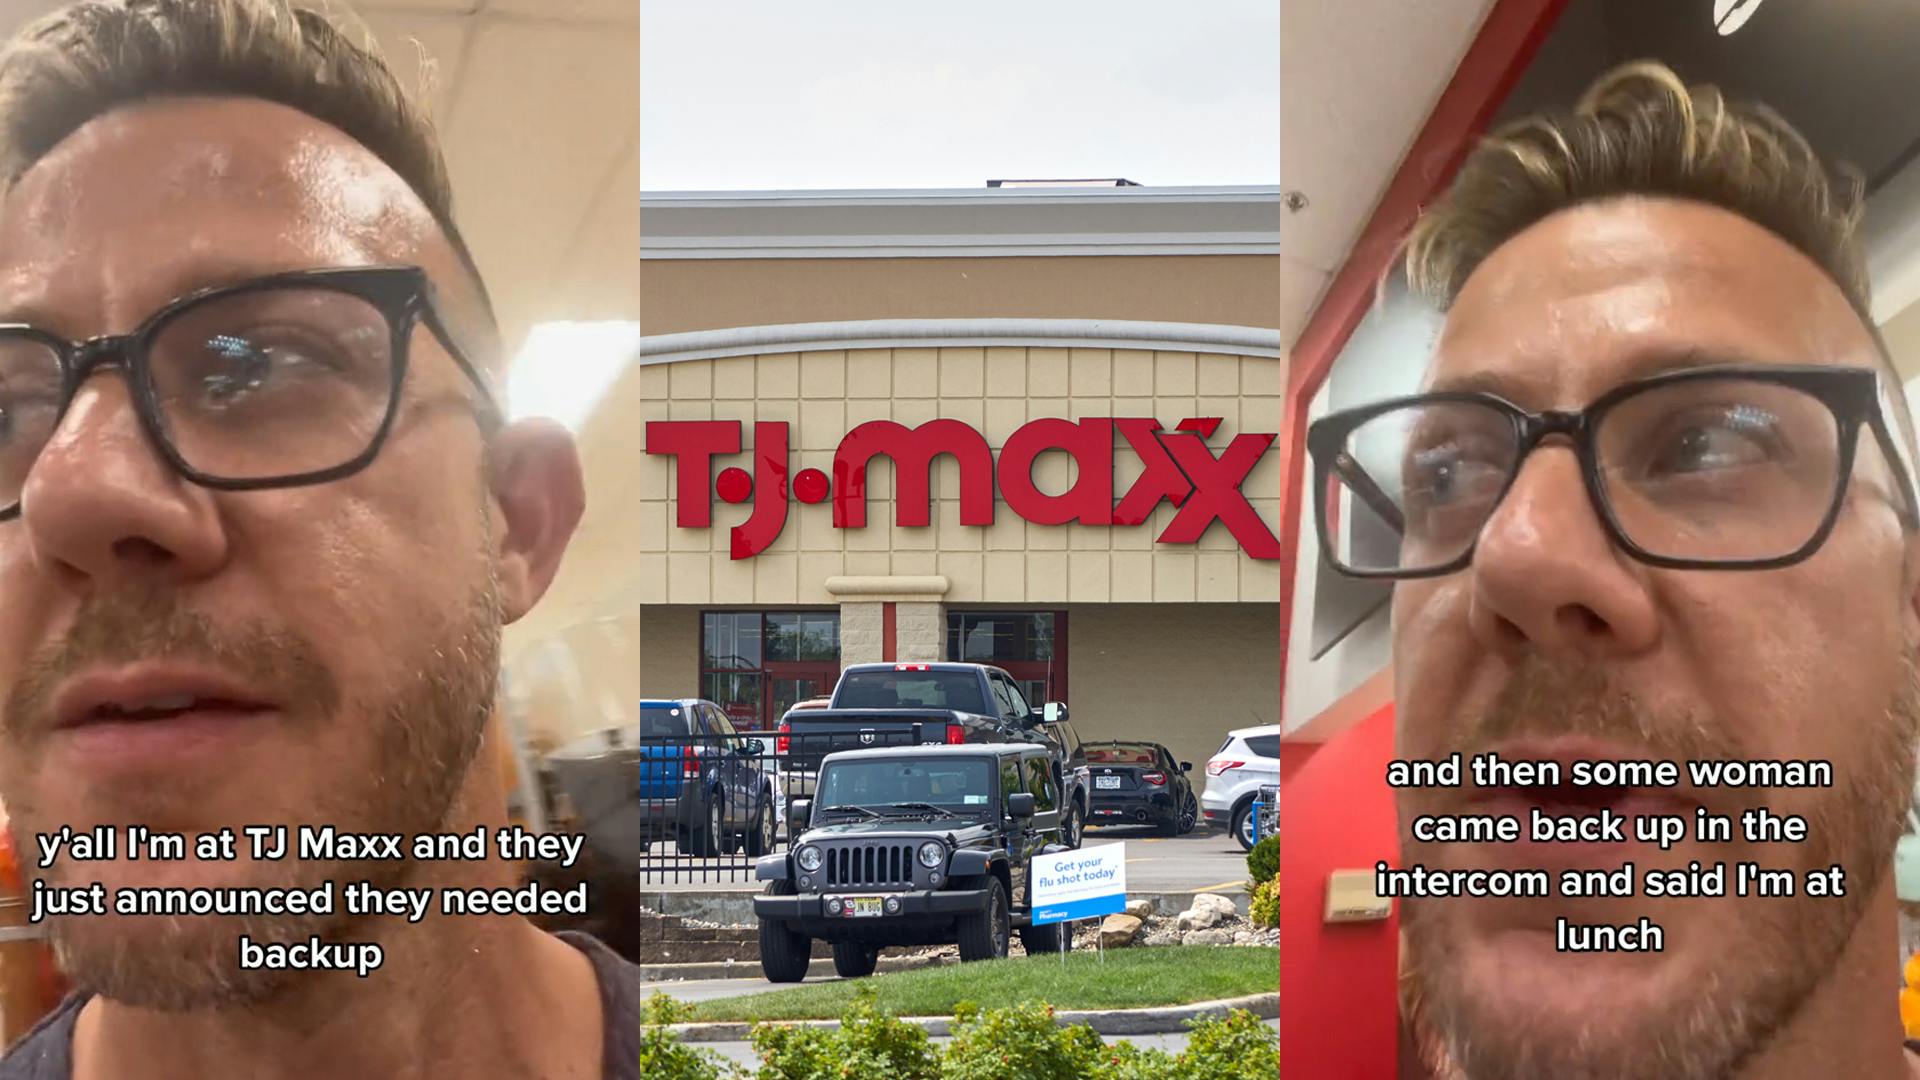 man speaking close to camera in TJ Maxx caption "y'all I'm at TJ Maxx and they just announced they needed backup" (l) TJ Maxx store with sign and parking lot (c) Man speaking close to camera in TJ Maxx caption "and then some woman came back up in the intercom and said "I'm at lunch" (r)